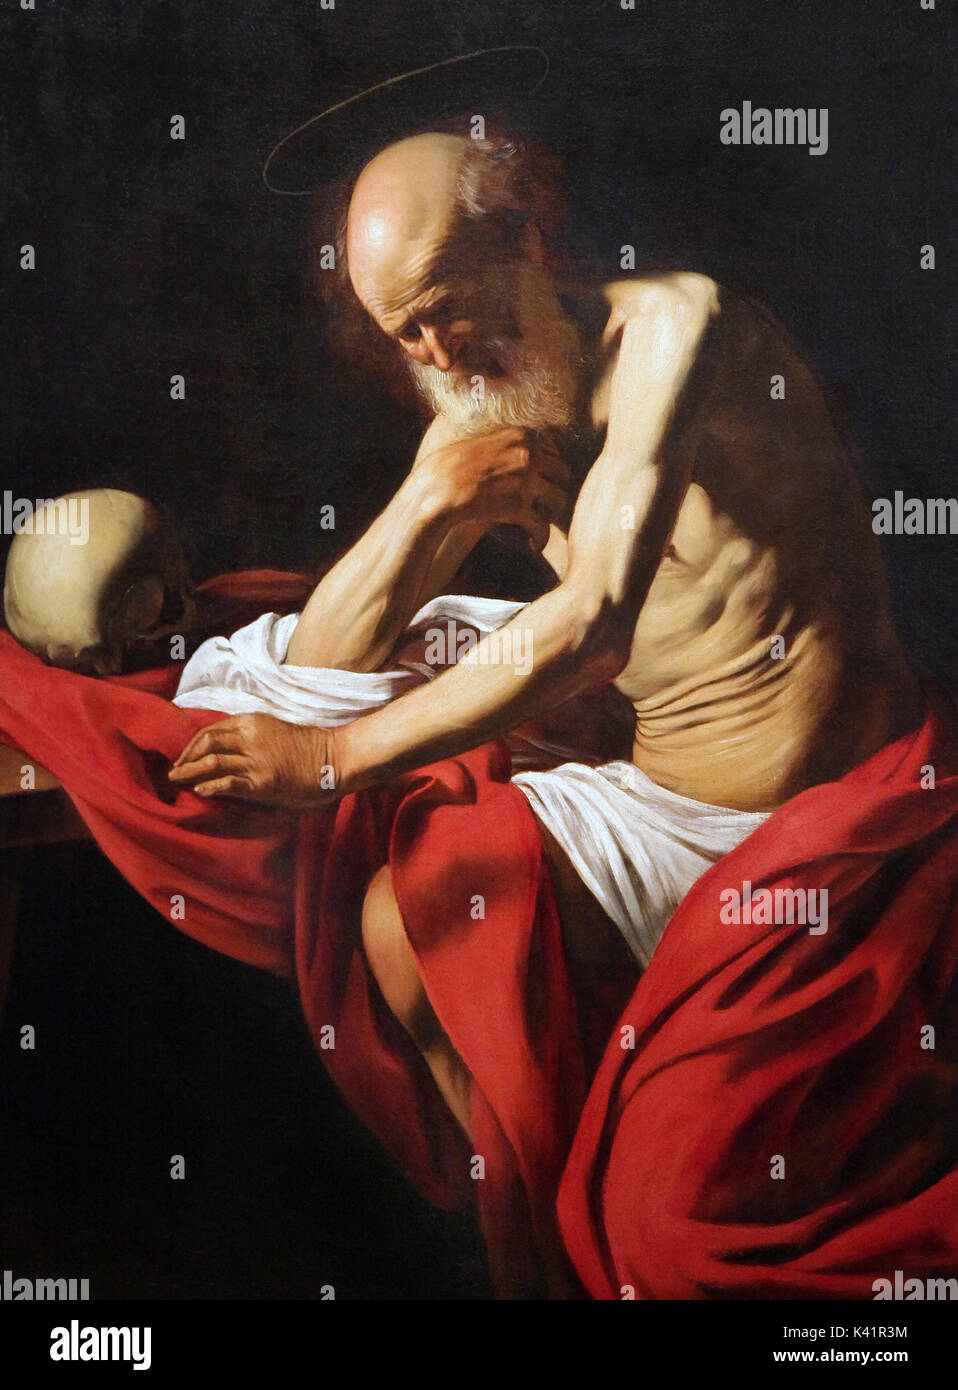 Saint Jerome in Meditation 1605 painting by Caravaggio 1571-1610 a painting by the Italian Baroque master Caravaggio. Stock Photo